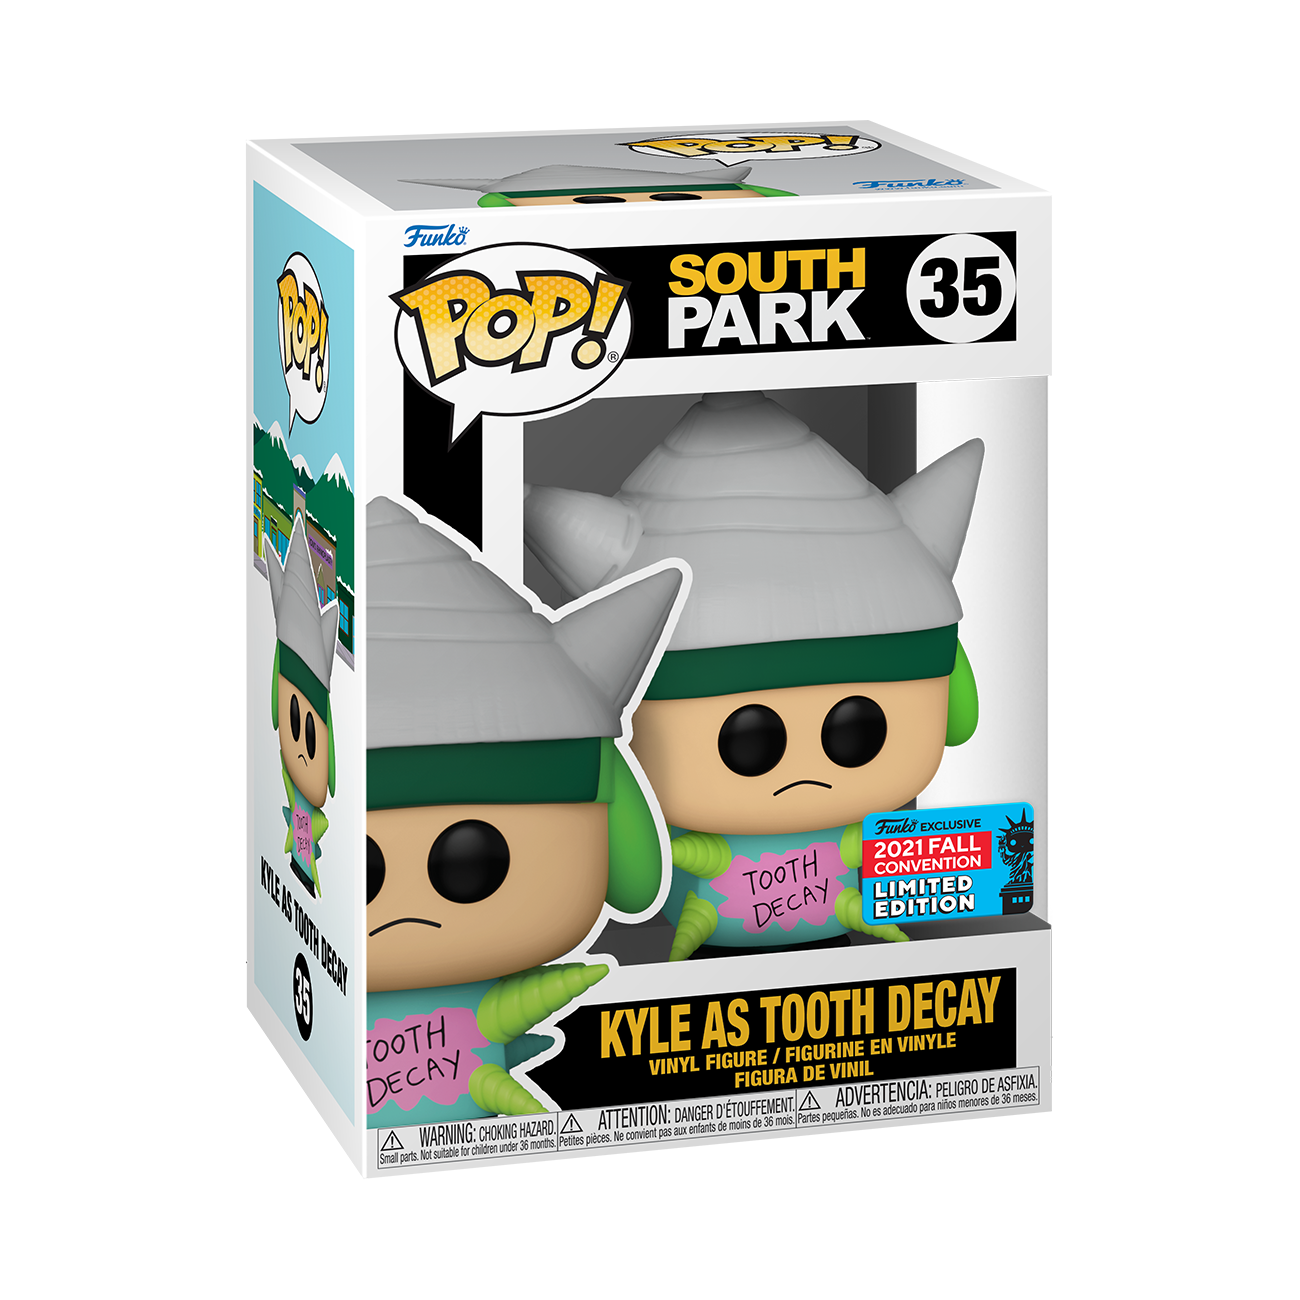 South Park - Kyle as Tooth Decay Pop! Vinyl Figure